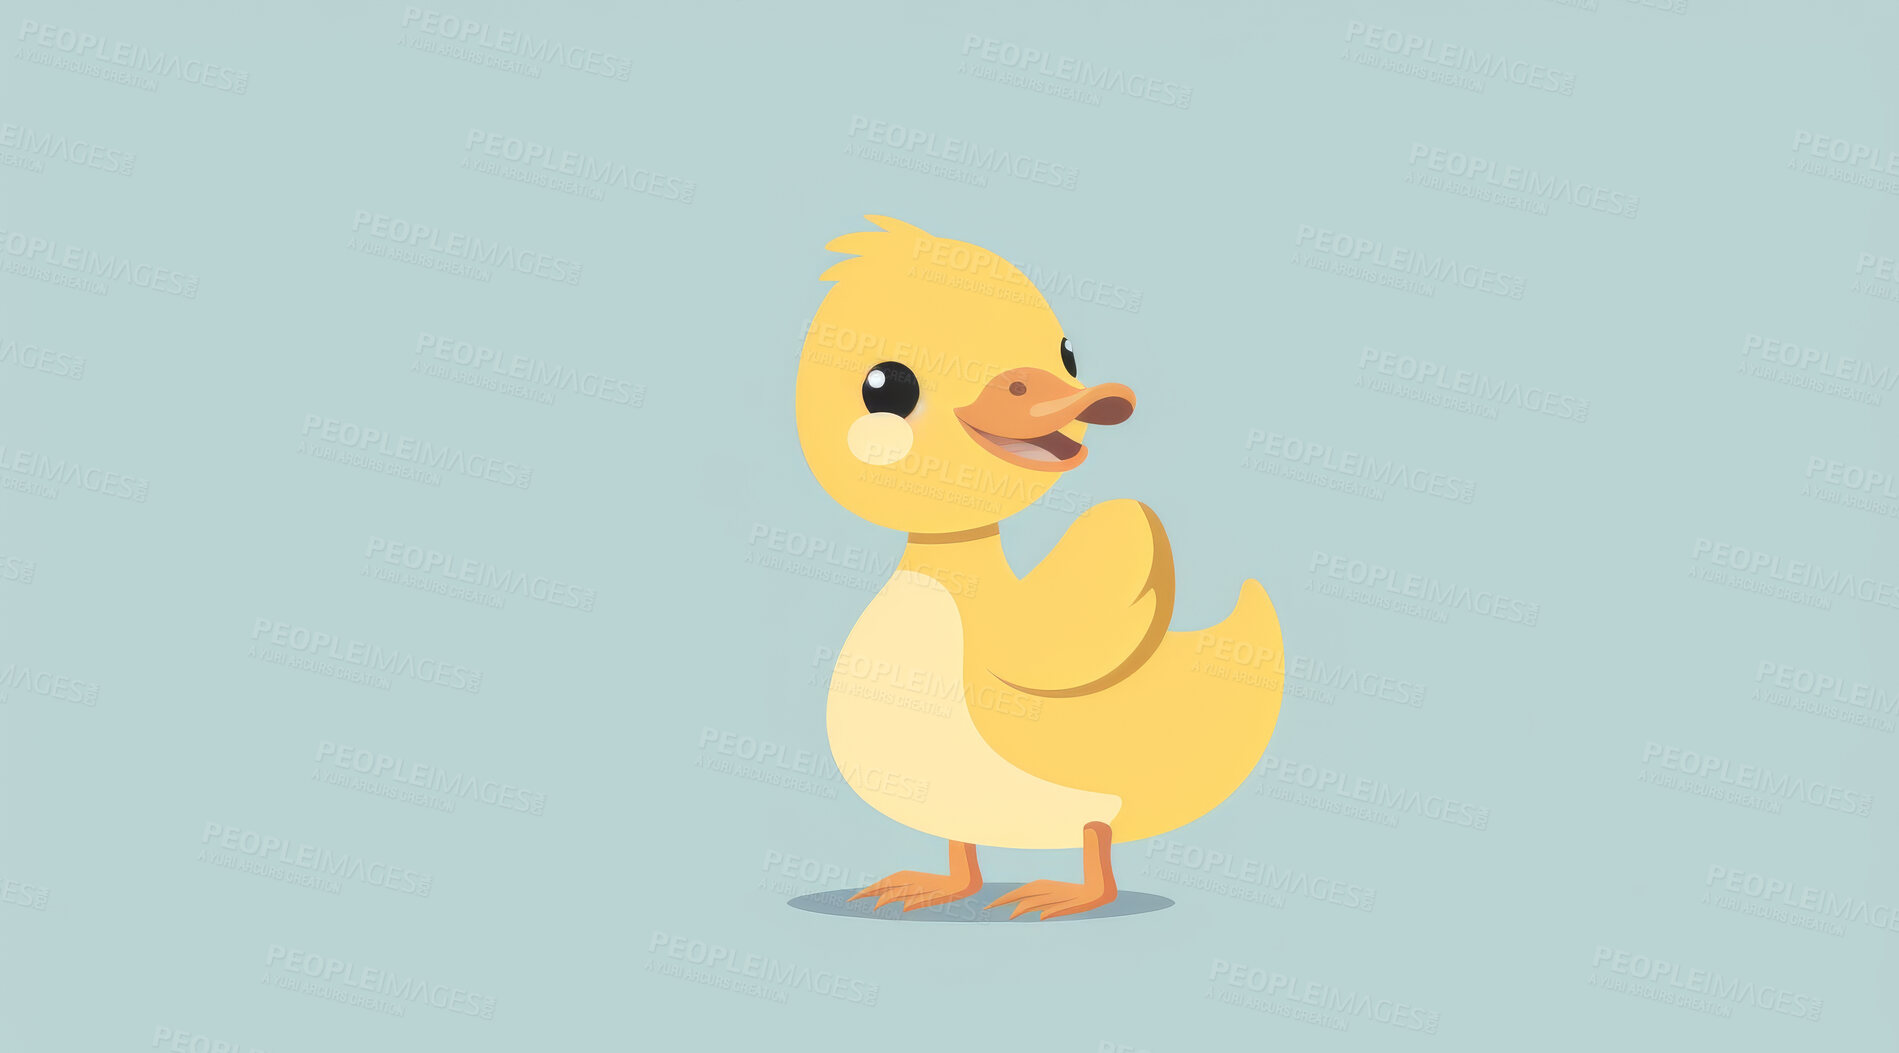 Buy stock photo Duck, illustration and digital art of an animal isolated on a background for poster, post card or printing. Cute, creative and drawing of a cartoon character for wallpaper, canvas and decoration